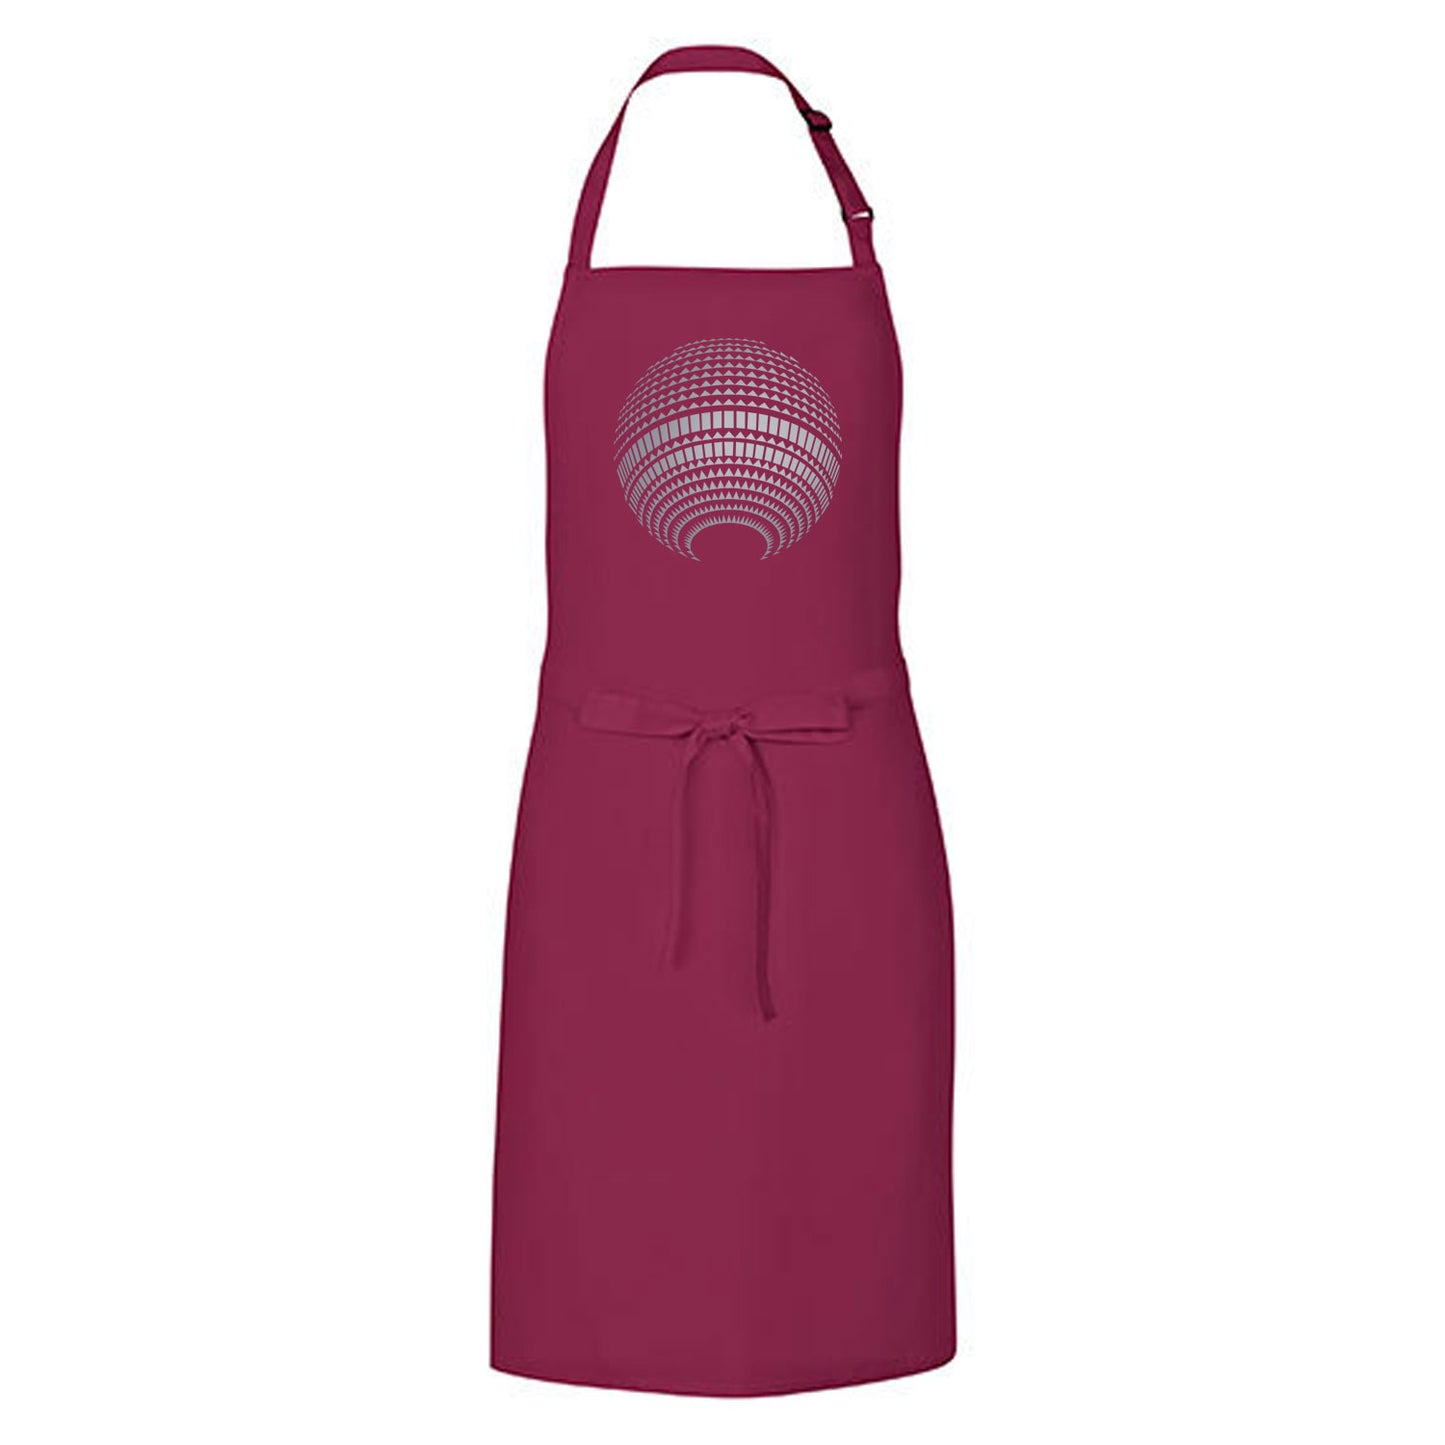 Cooking apron: TV Tower Disco